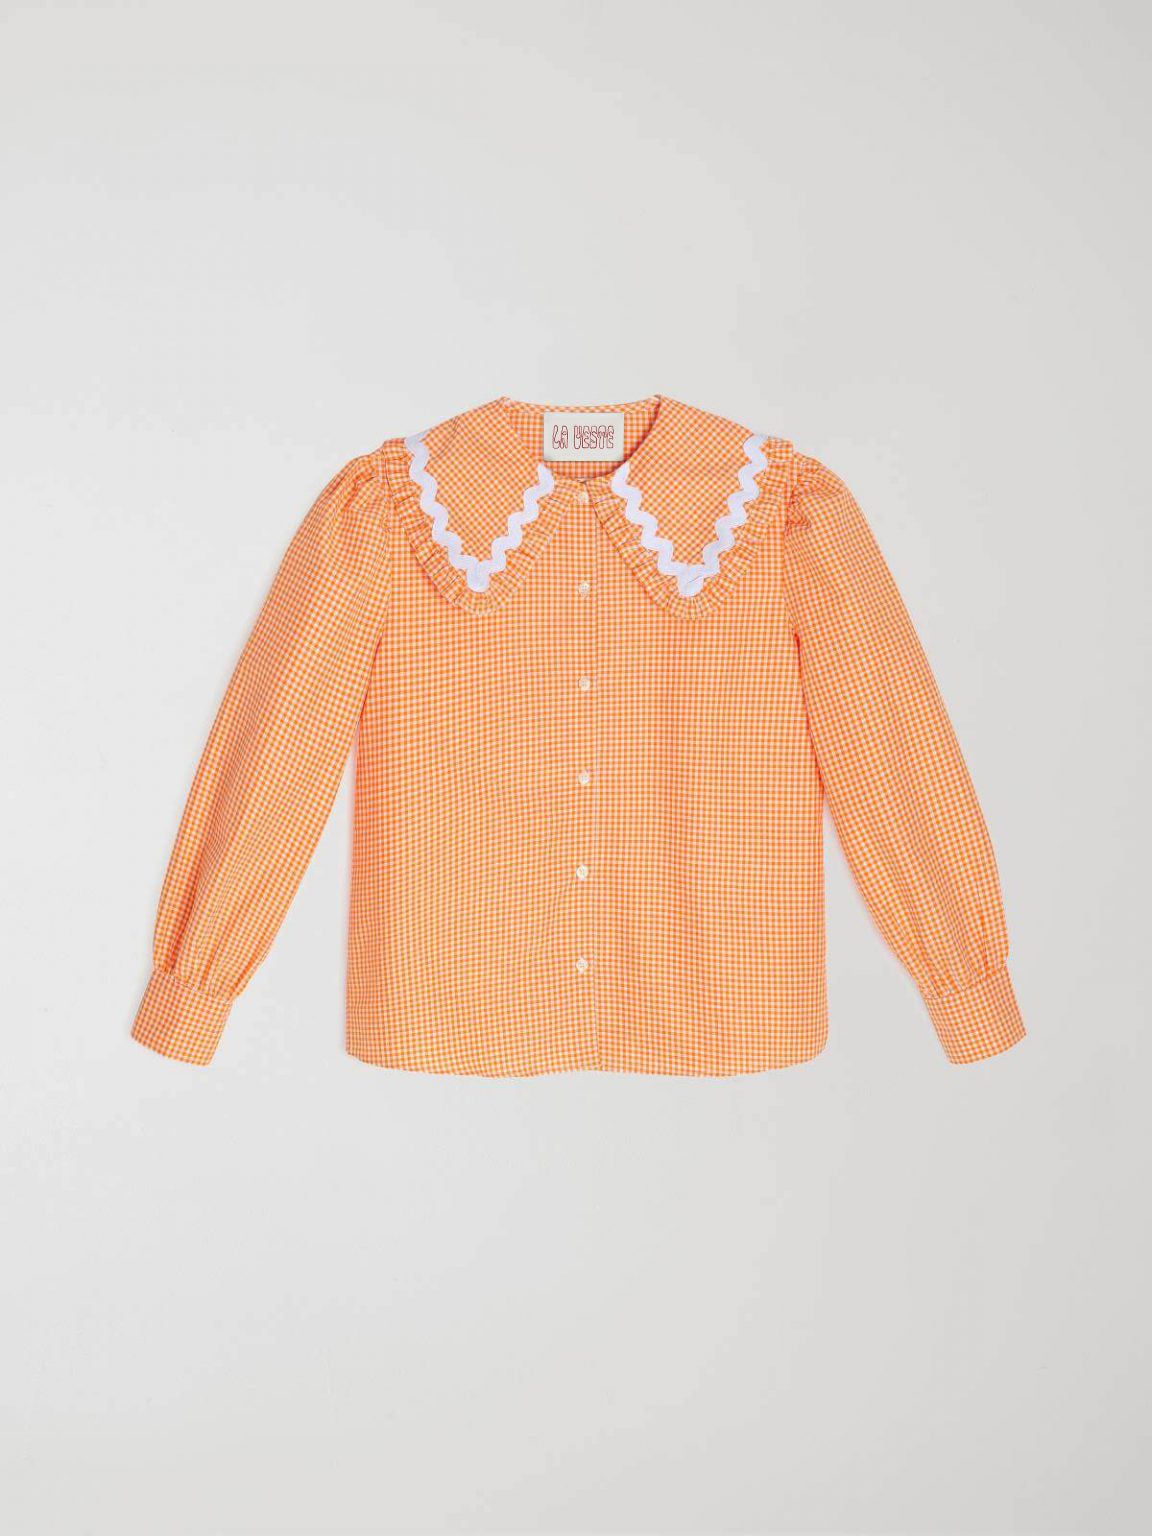 Orange and white vichy check shirt made of cotton with white trim detail on the collar